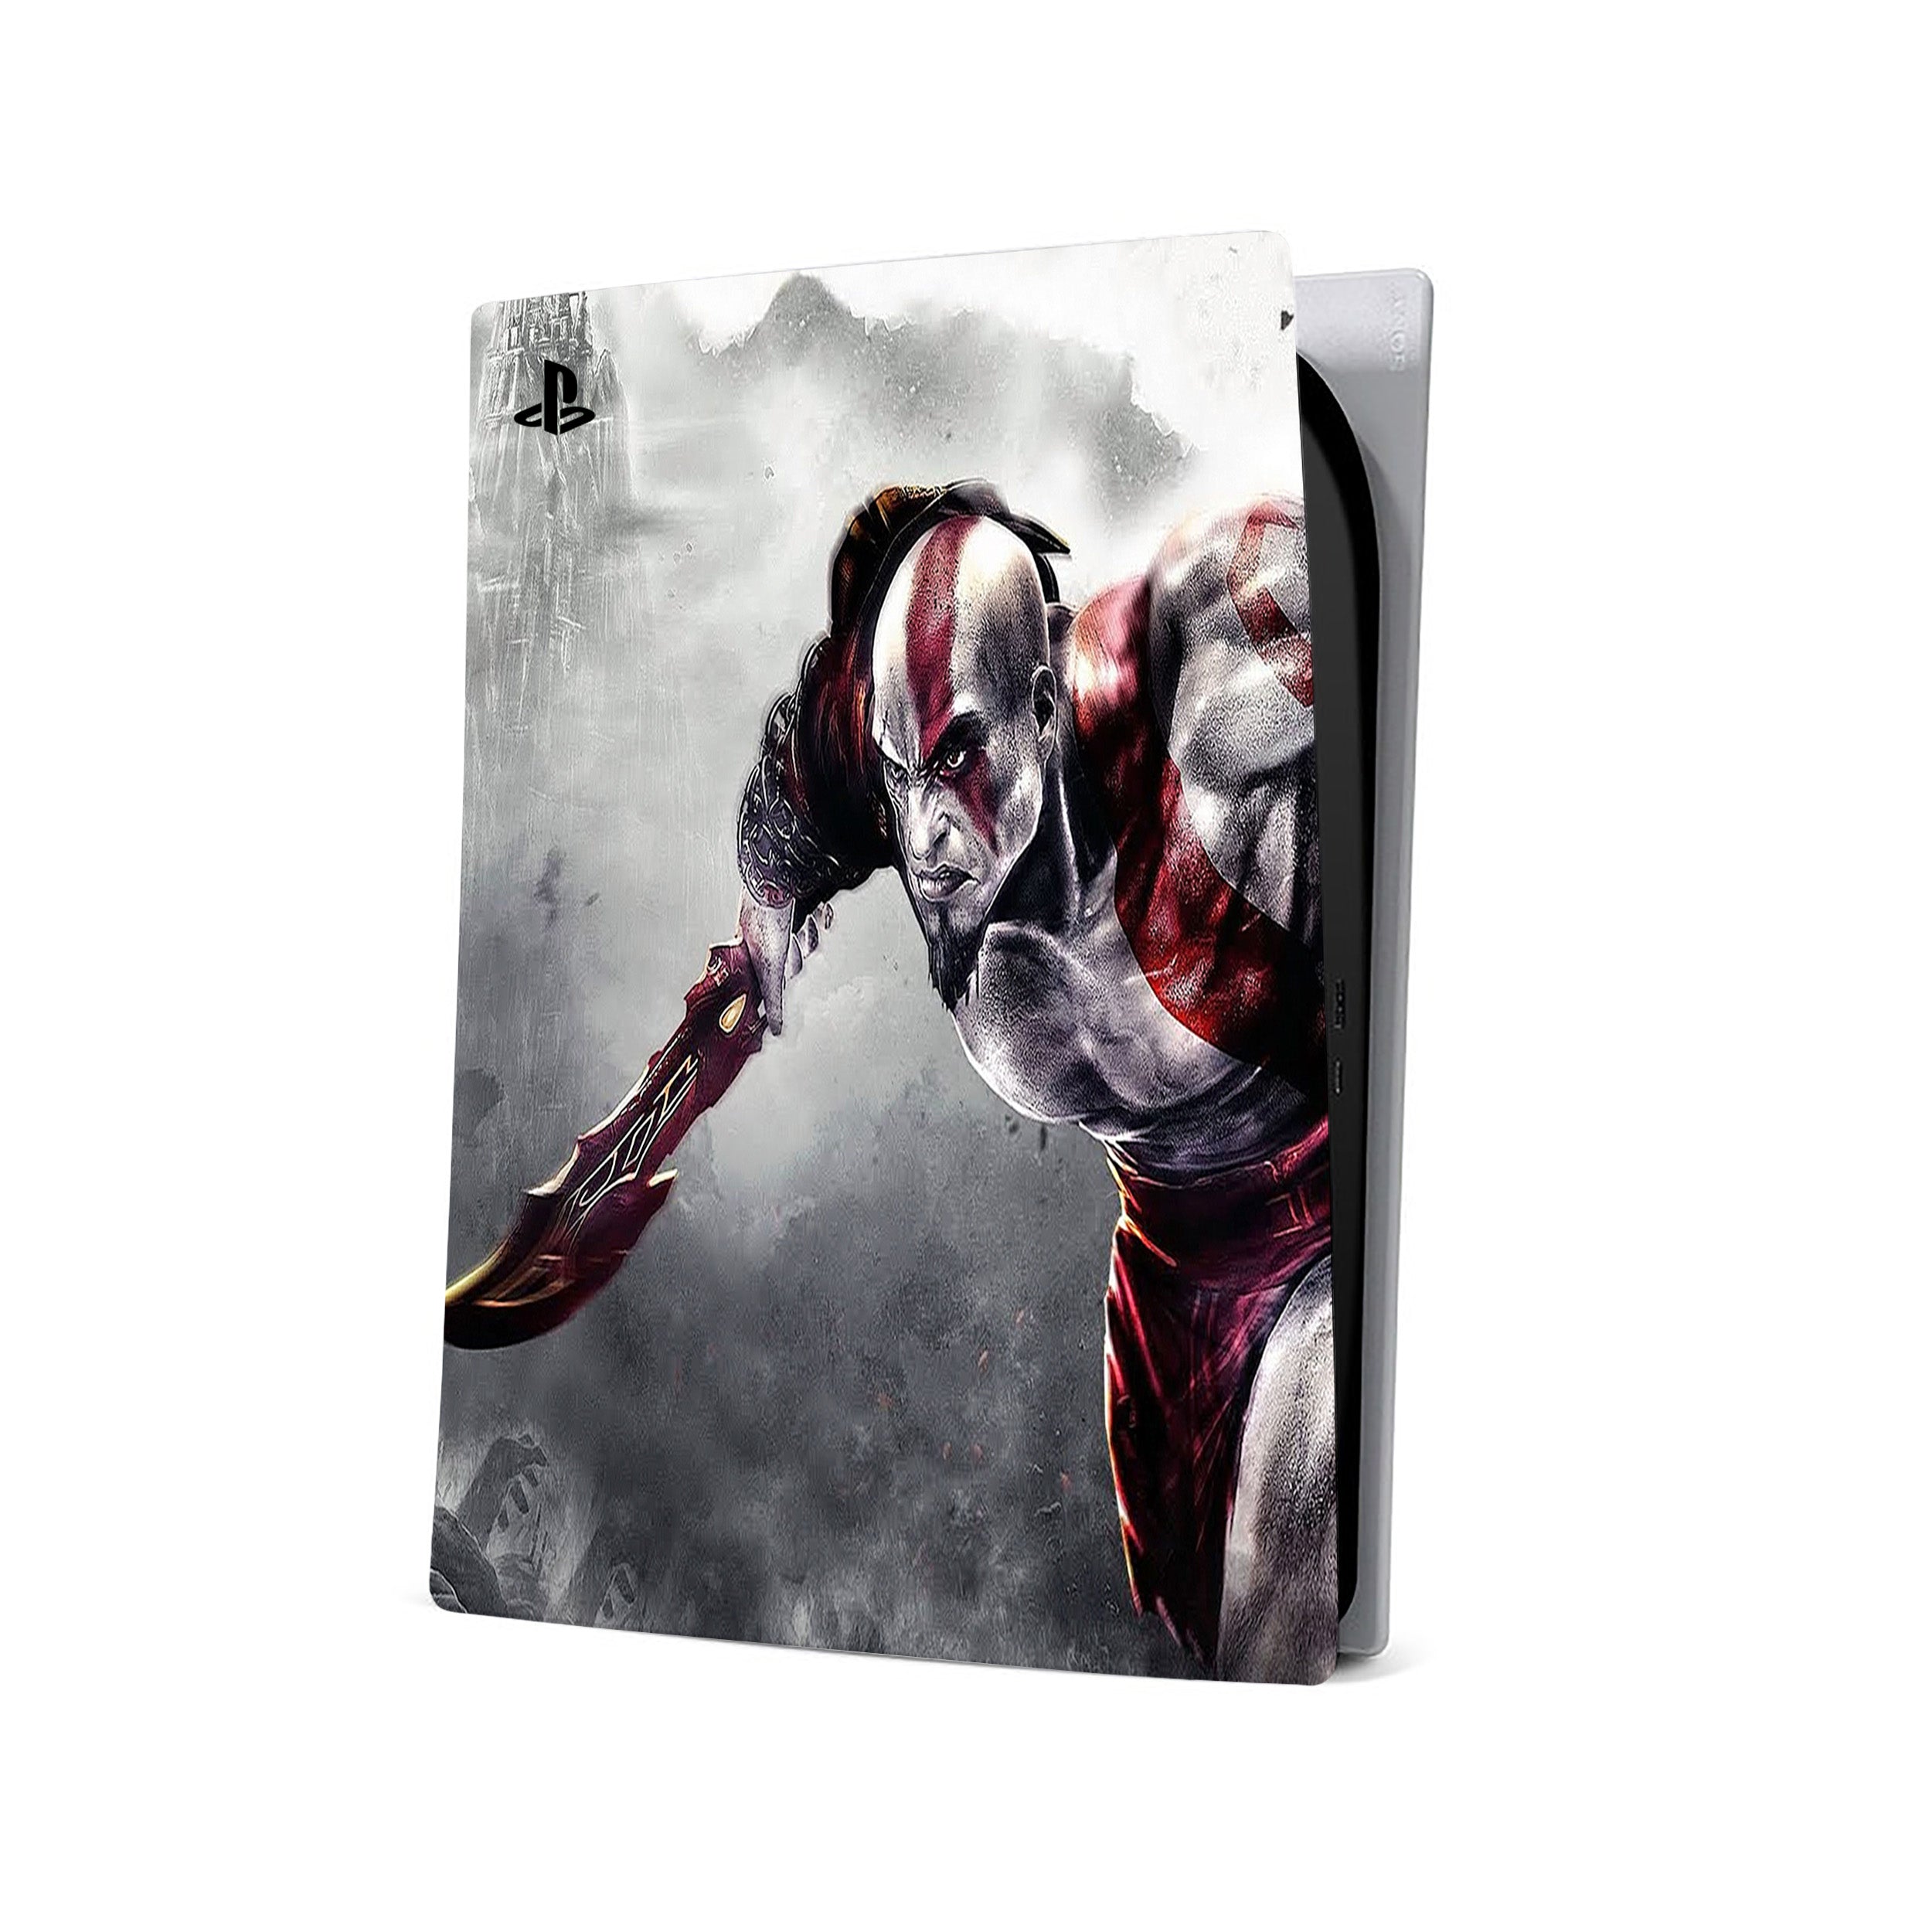 A video game skin featuring a God Of War Kratos Face design for the PS5.